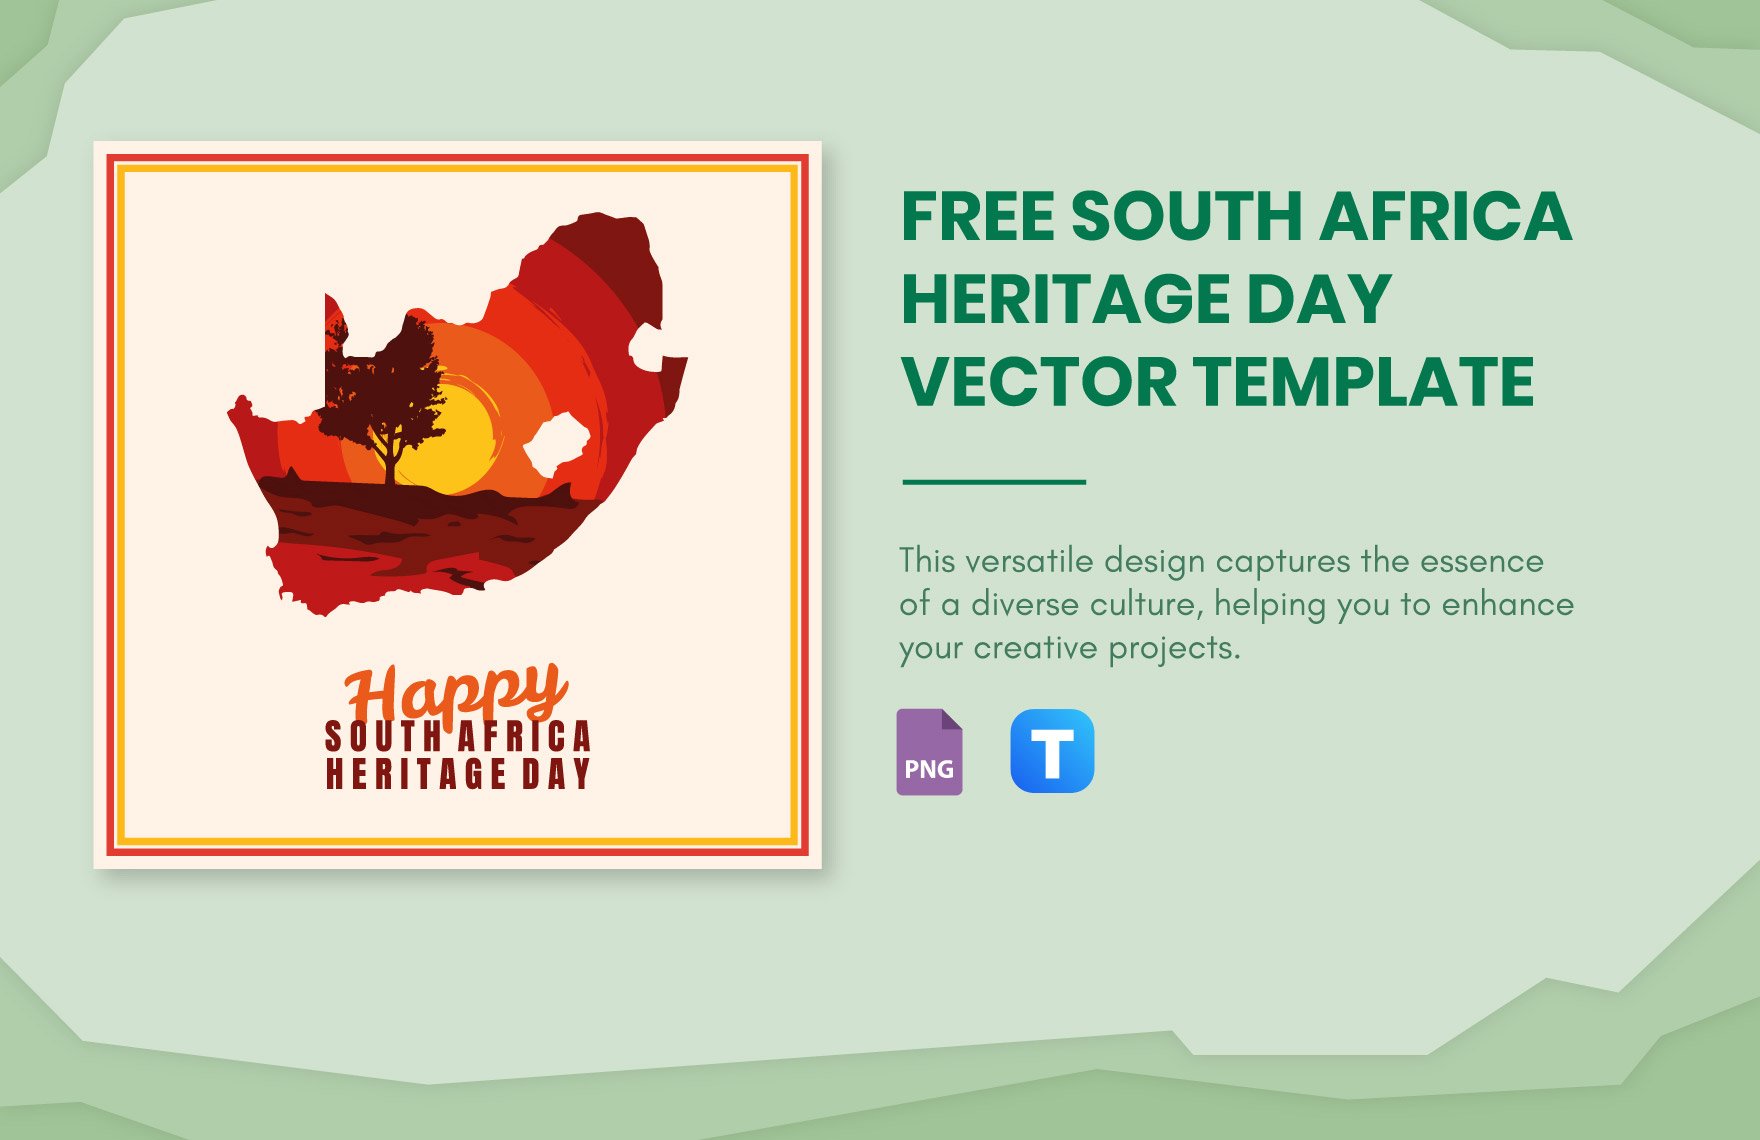 South Africa Heritage Day Vector in PNG